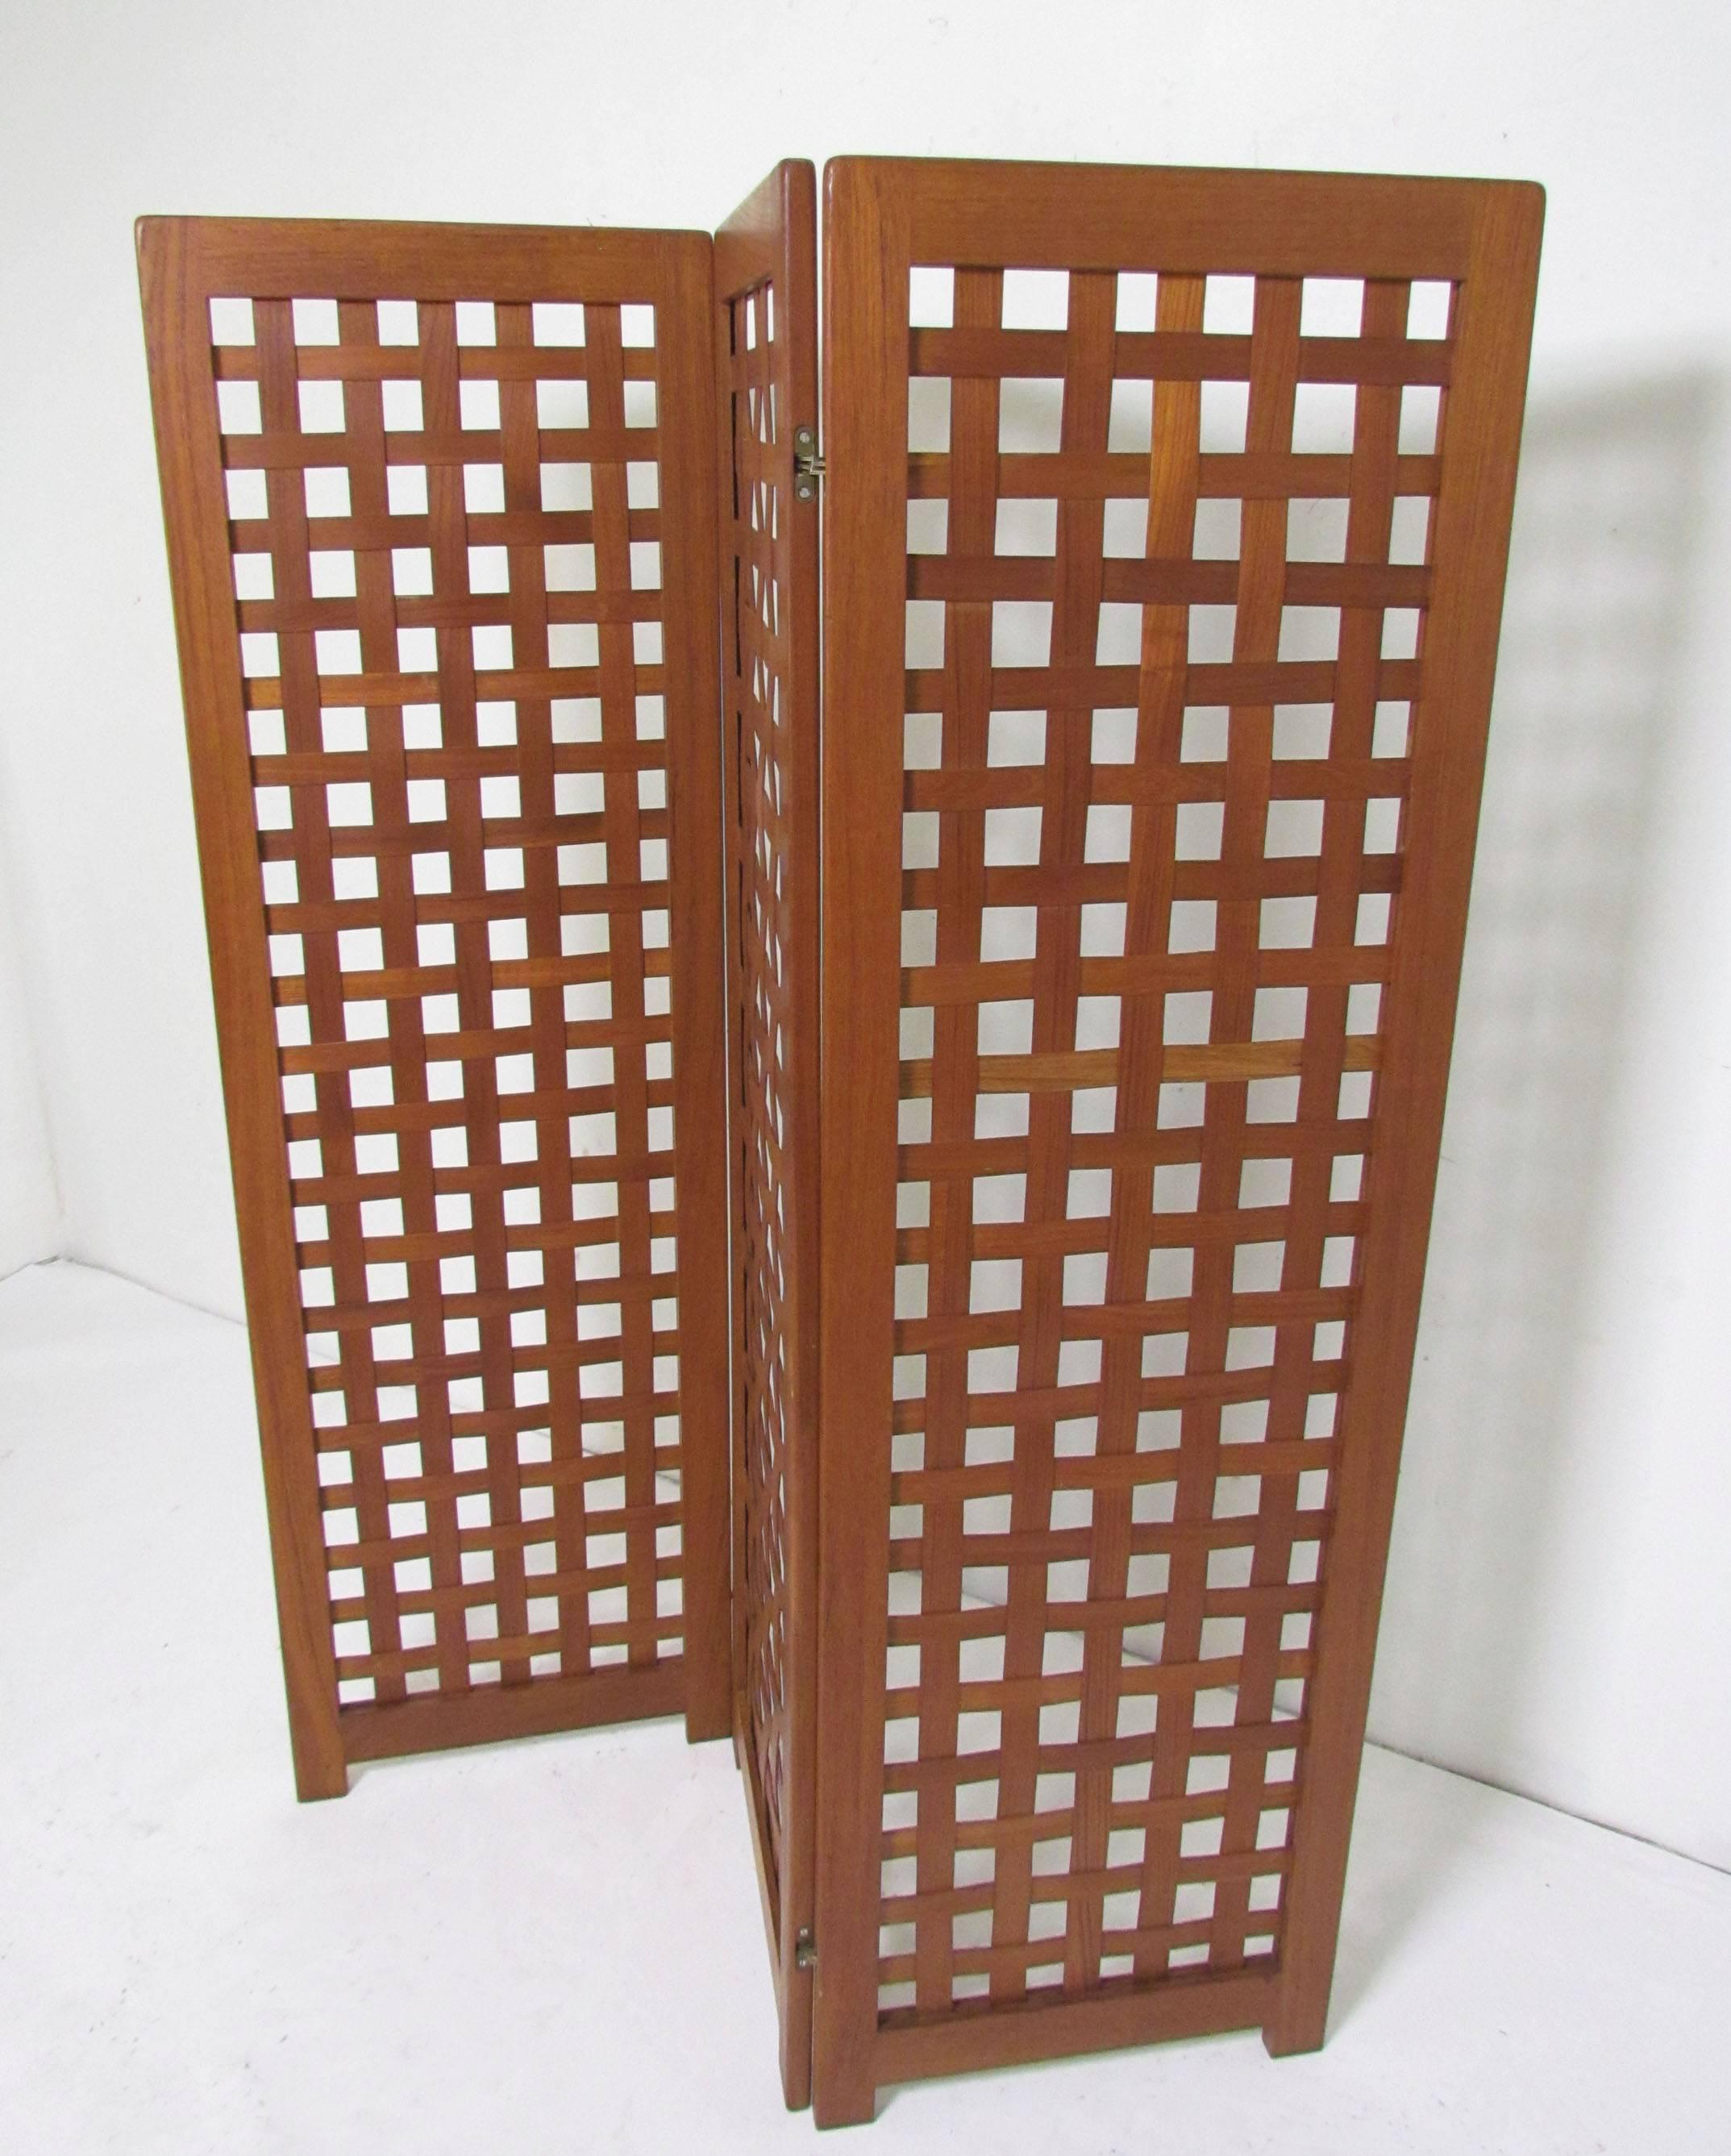 Teak three-panel basket weave screen circa 1970s, marked made in Denmark.

Overall height is 59